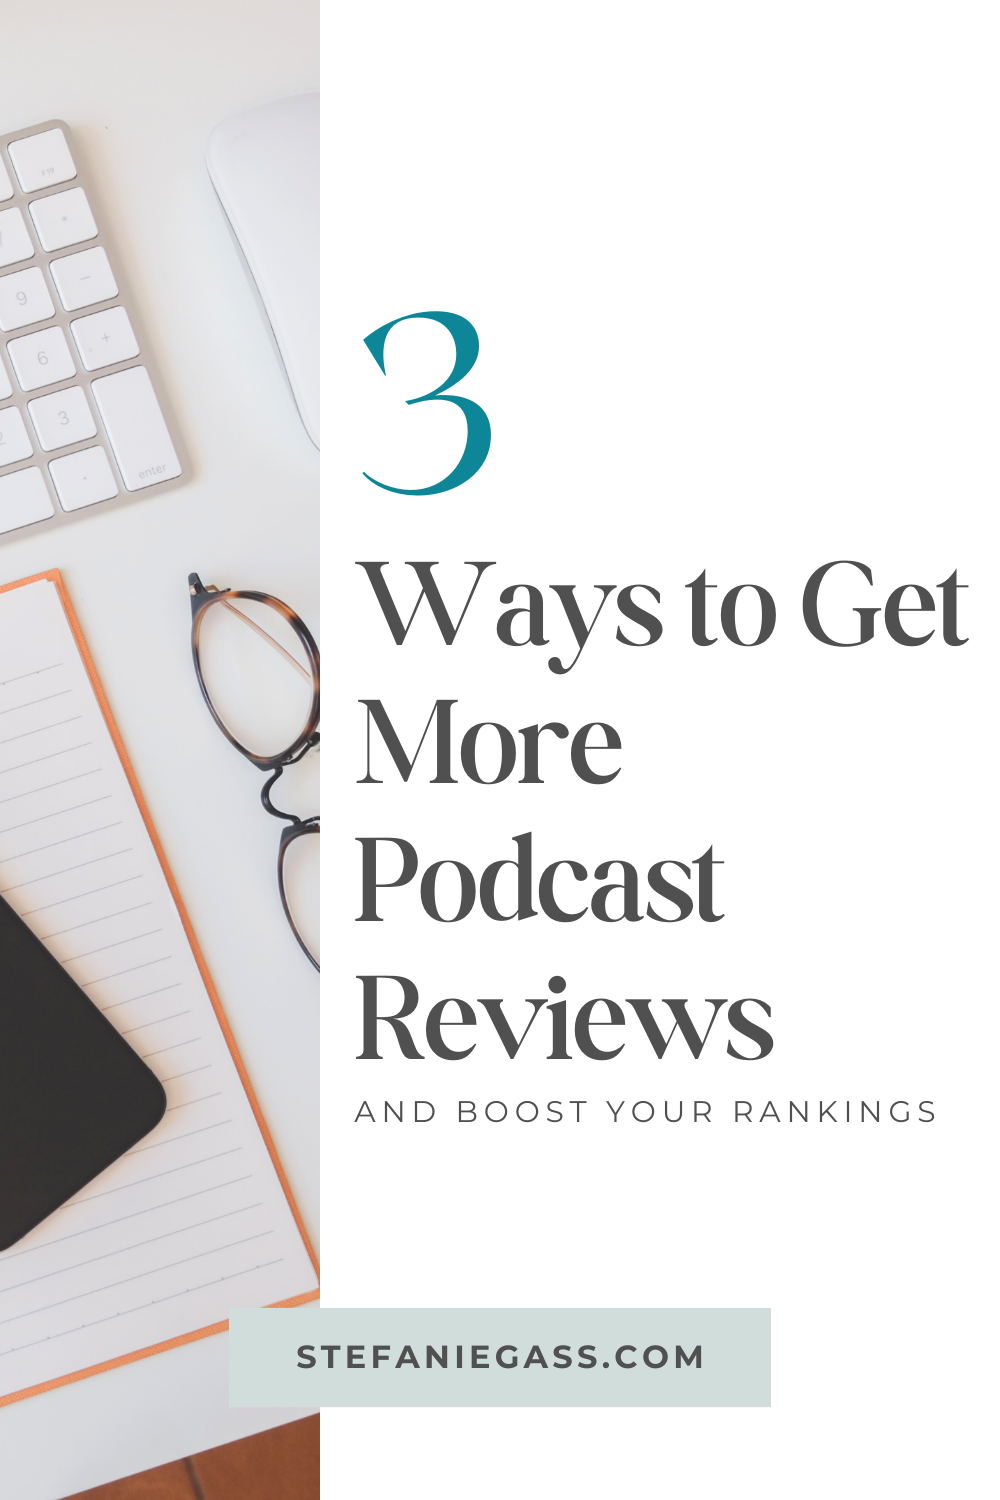 3 ways to get more podcast reviews and boost your rankings